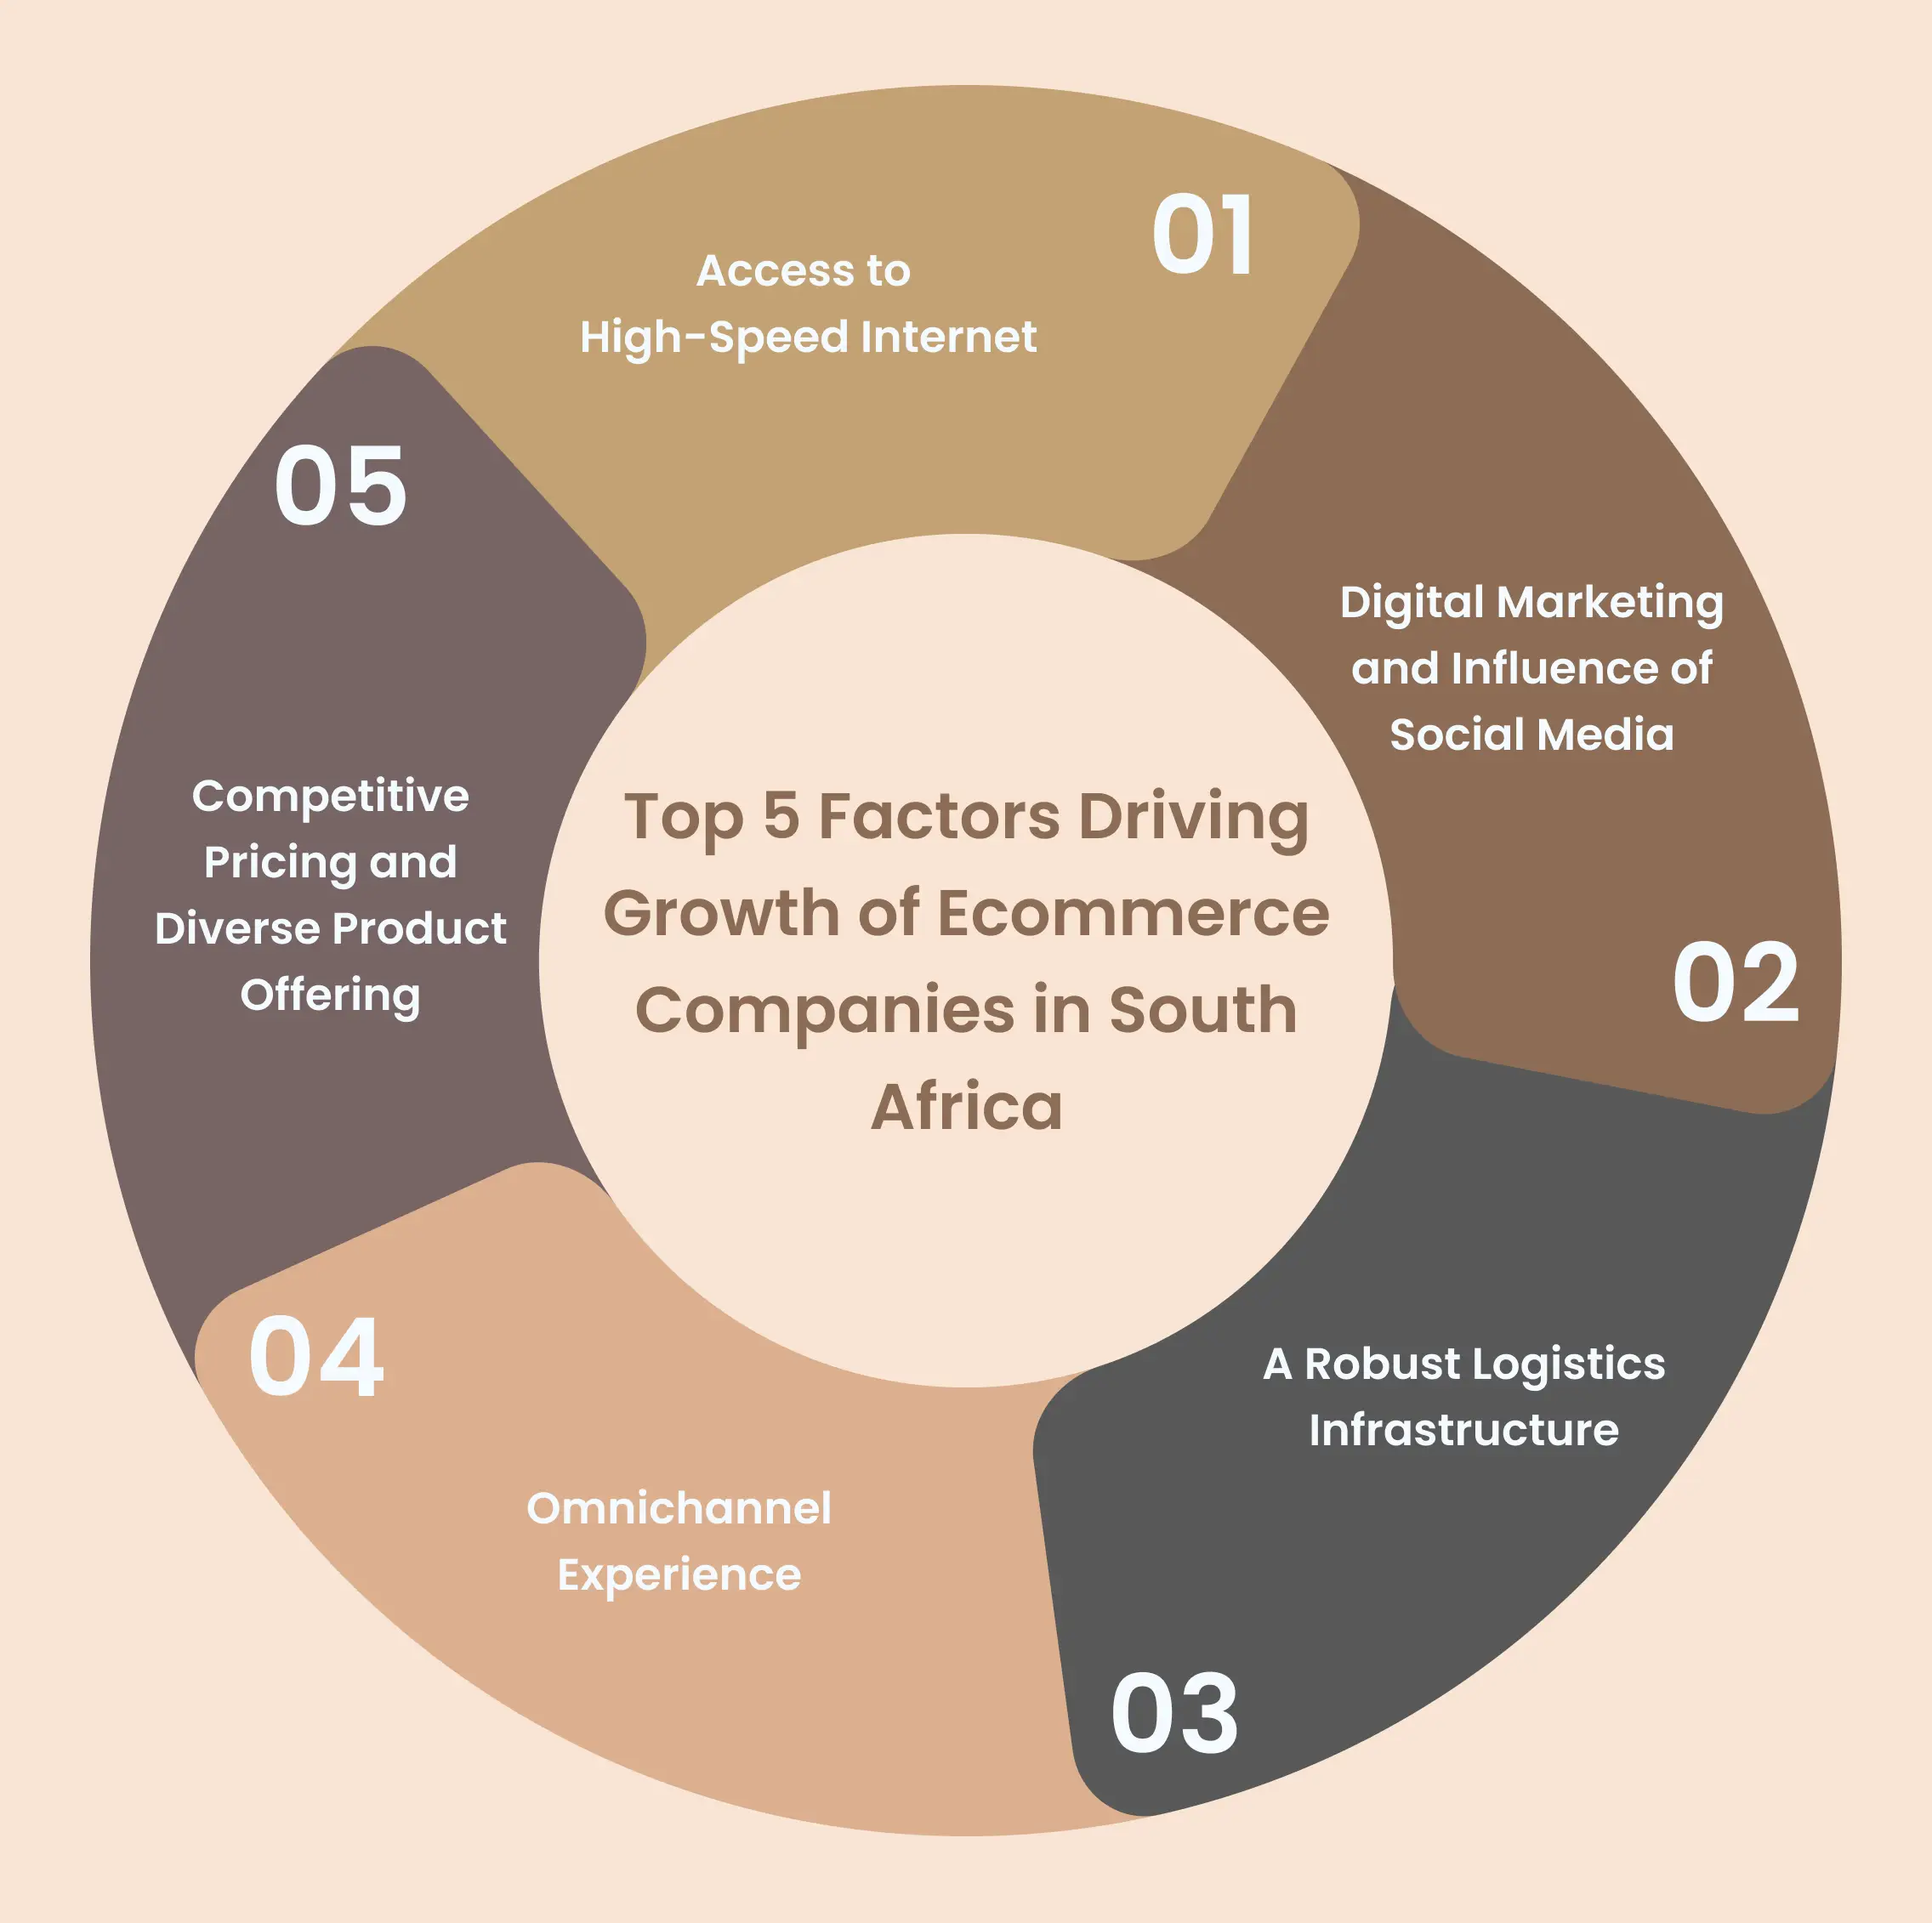 A Visual representation of Top 5 Factors Driving Growth of Ecommerce Companies in South Africa.